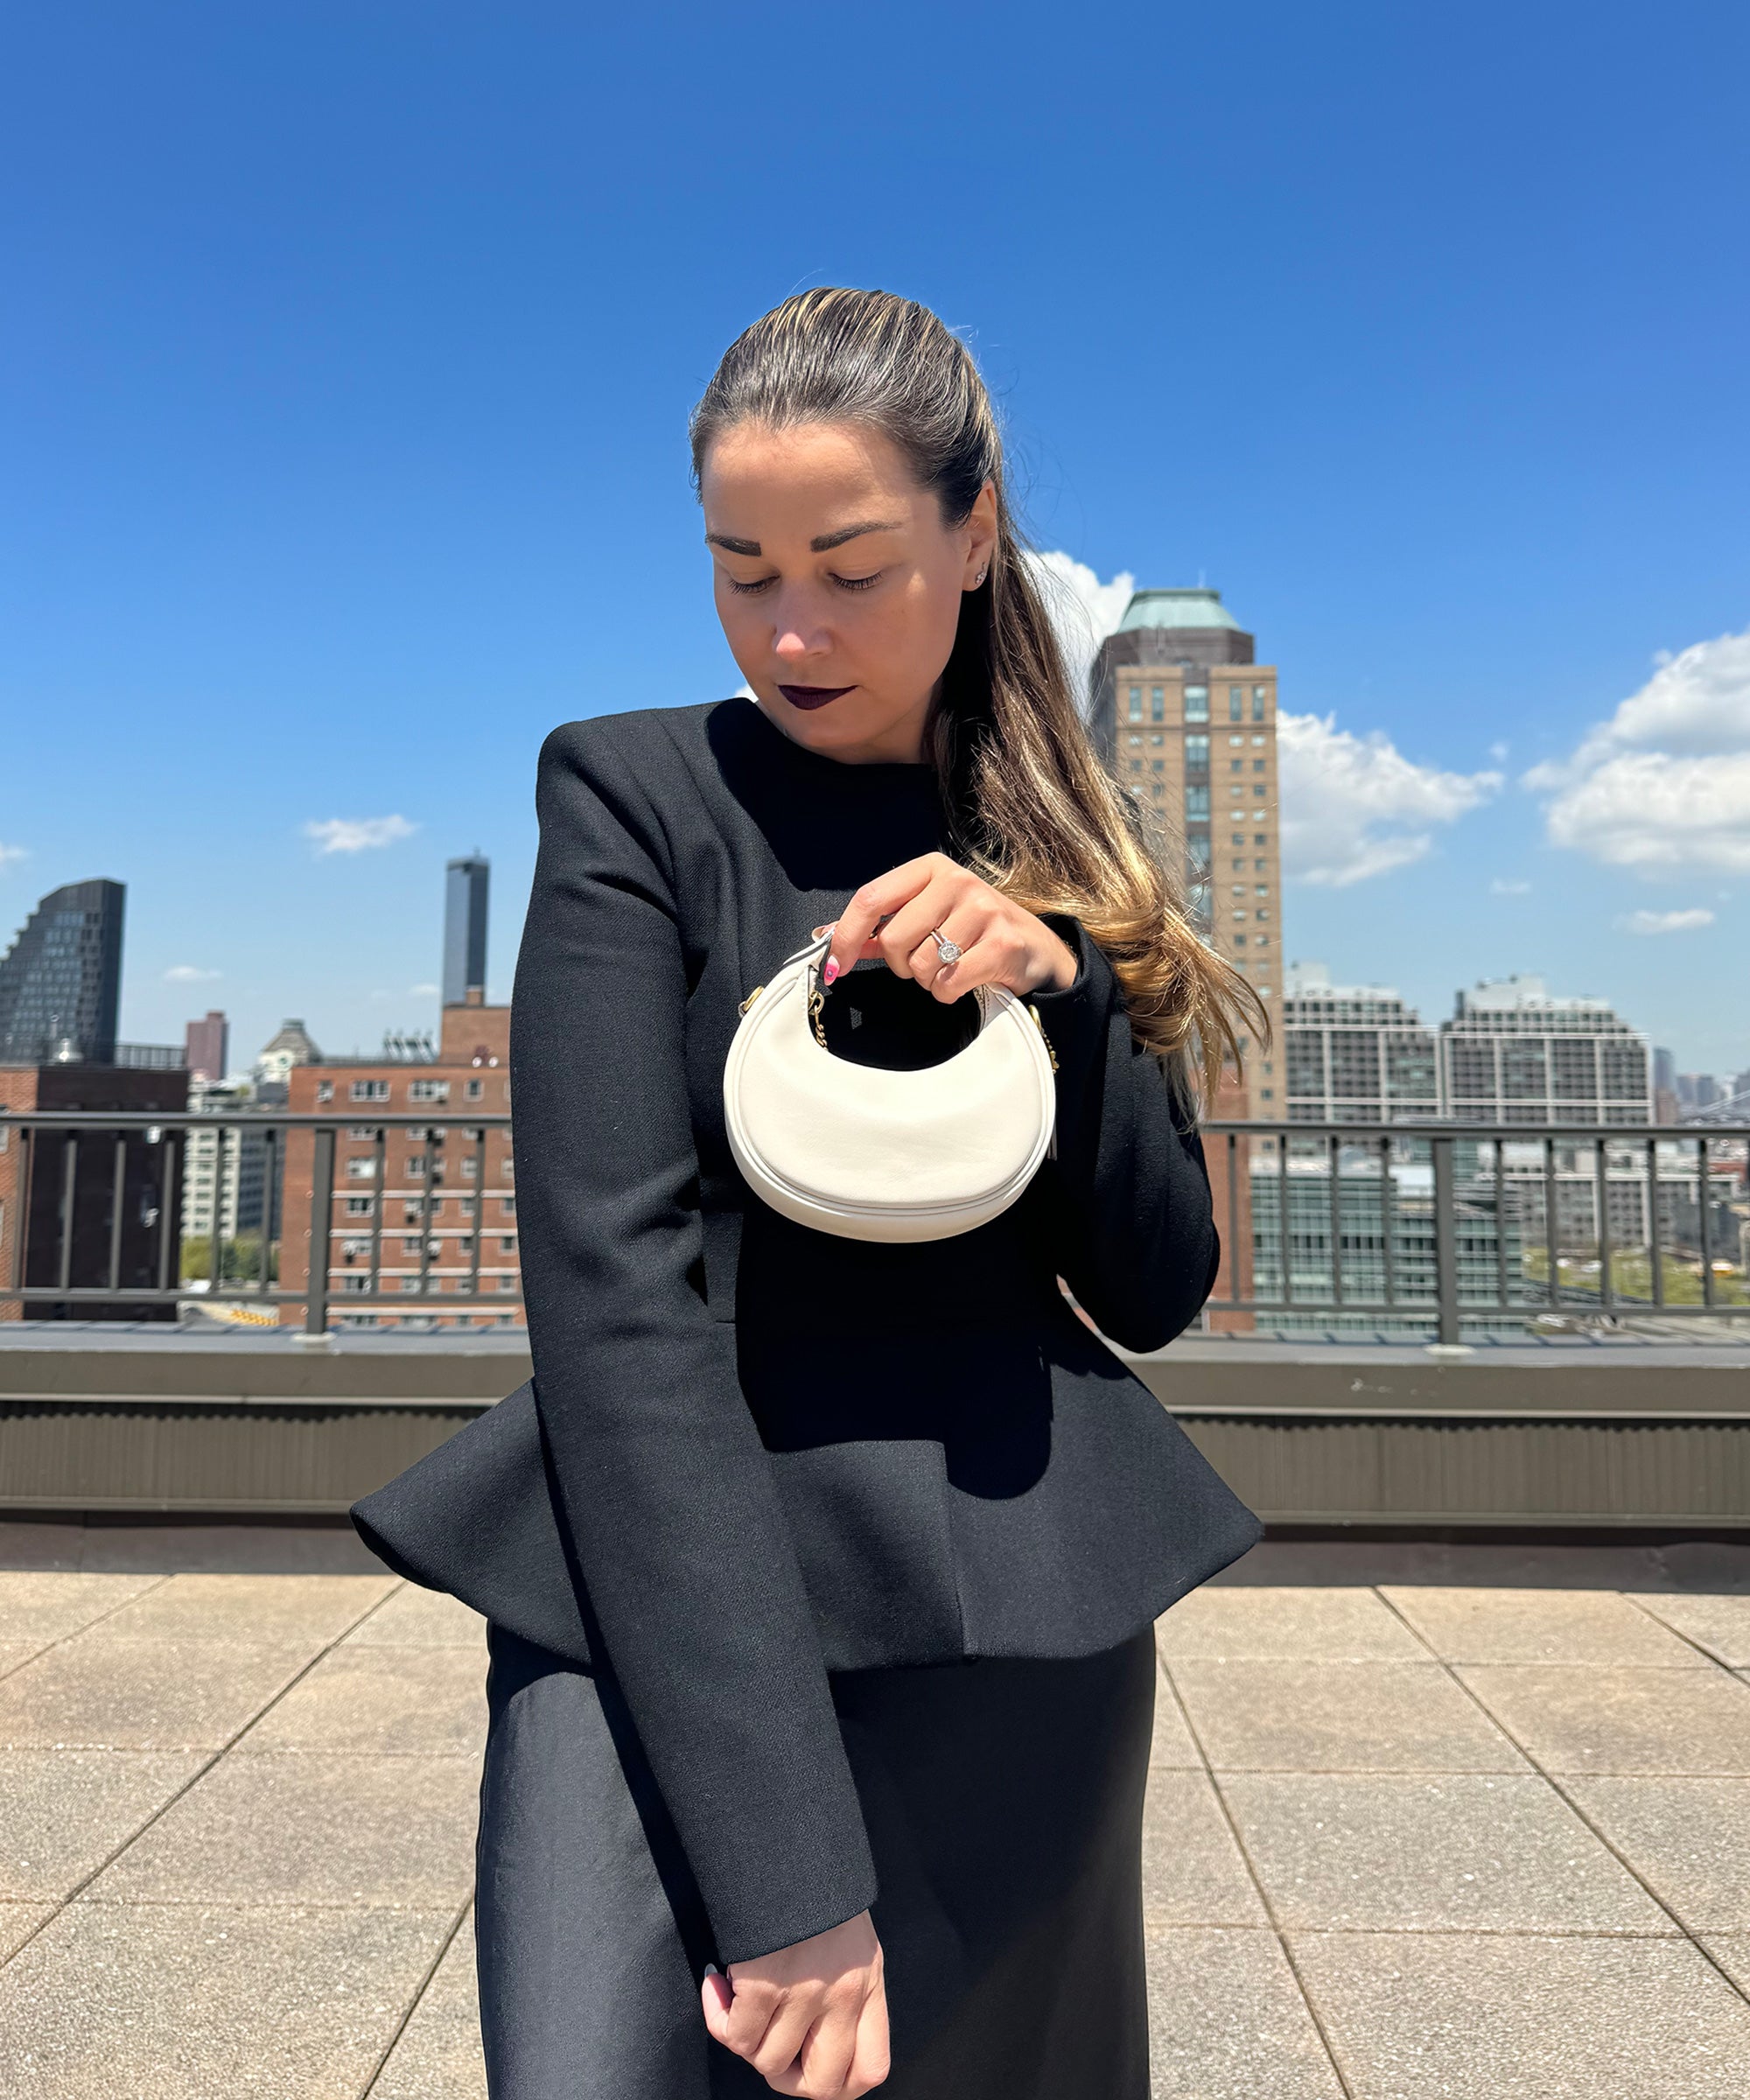 White Handbags Are Trending: How To Style Coach’s Jonie Bag